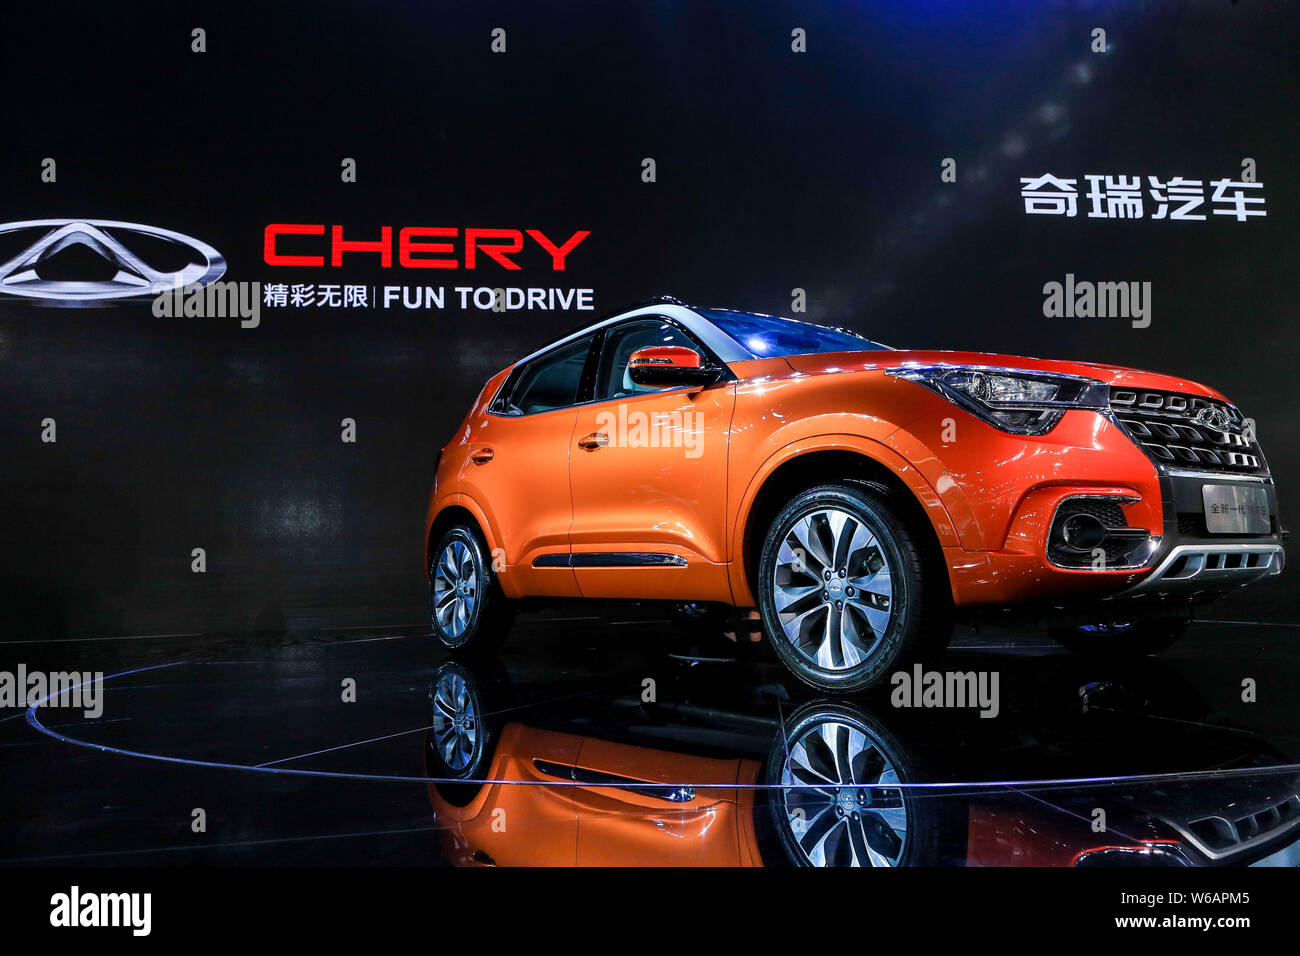 Cash-strapped Chery to sell controlling stake 